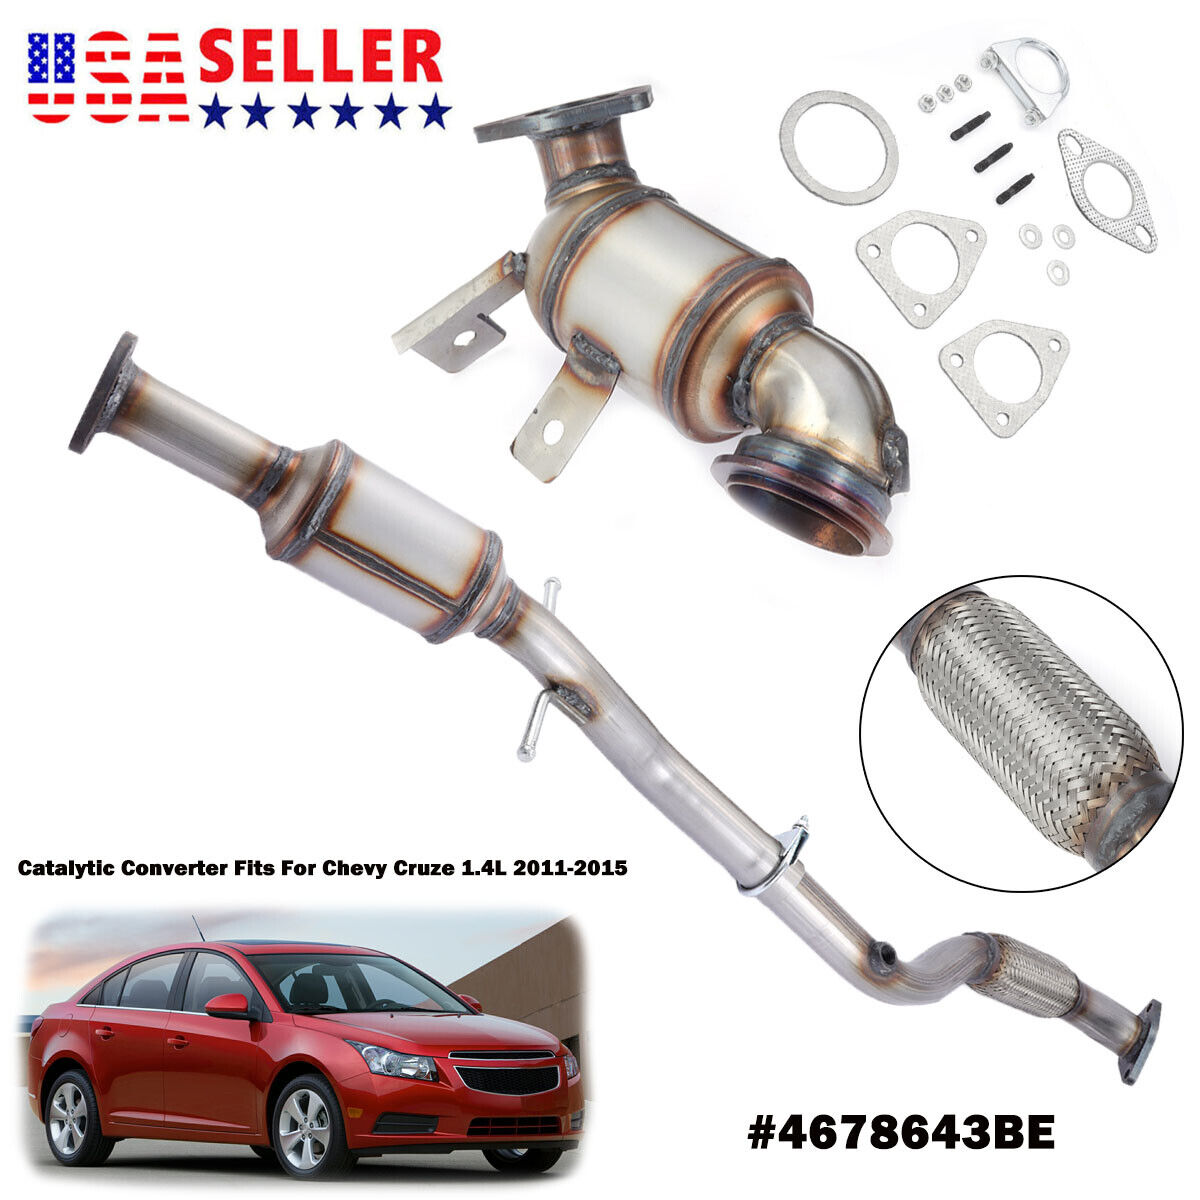 Both Front & Rear Catalytic Converters For Chevy Cruze 1.4L 2011-2015 #4678643BE